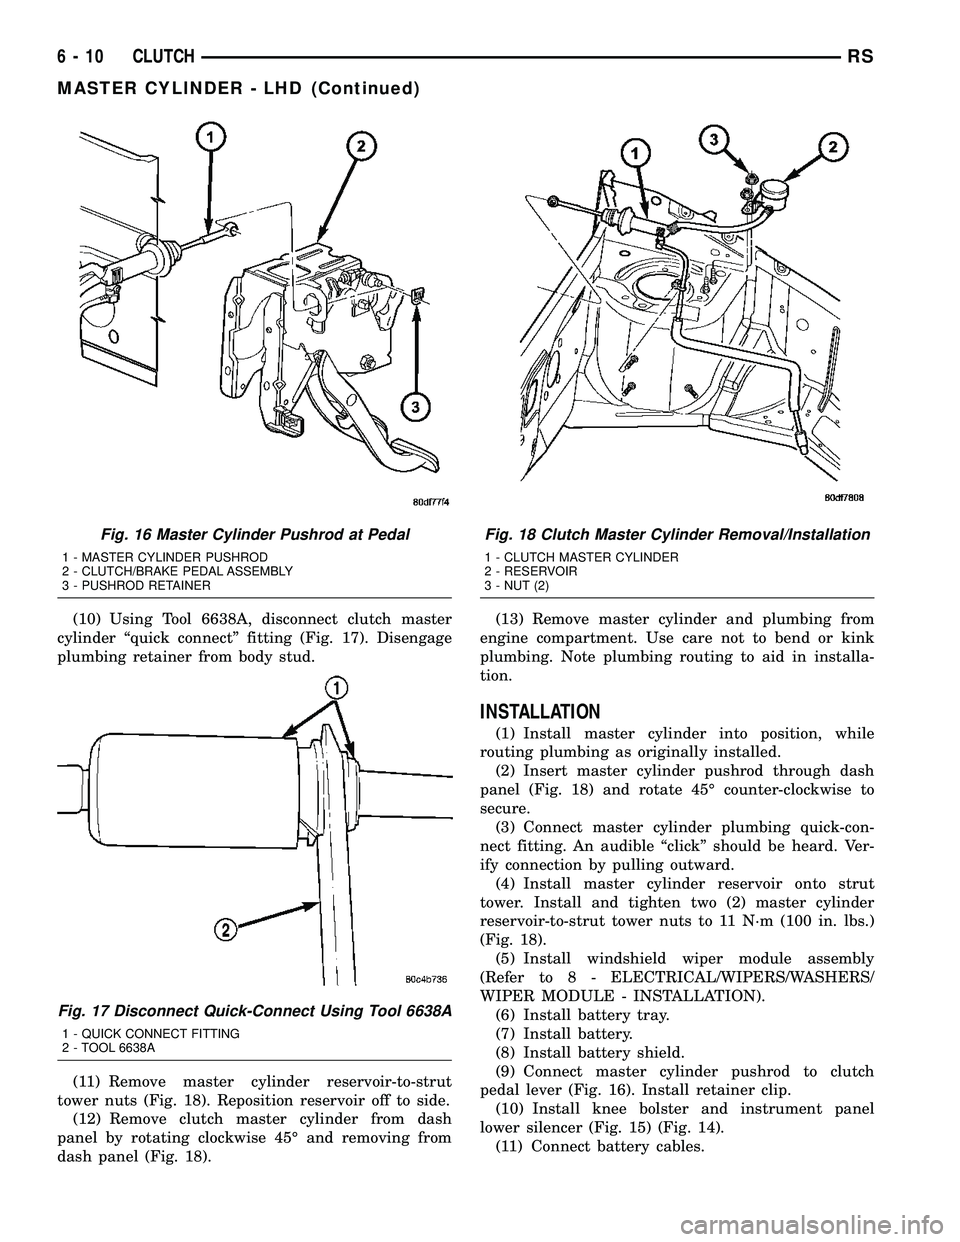 DODGE TOWN AND COUNTRY 2004  Service Manual (10) Using Tool 6638A, disconnect clutch master
cylinder ªquick connectº fitting (Fig. 17). Disengage
plumbing retainer from body stud.
(11) Remove master cylinder reservoir-to-strut
tower nuts (Fig